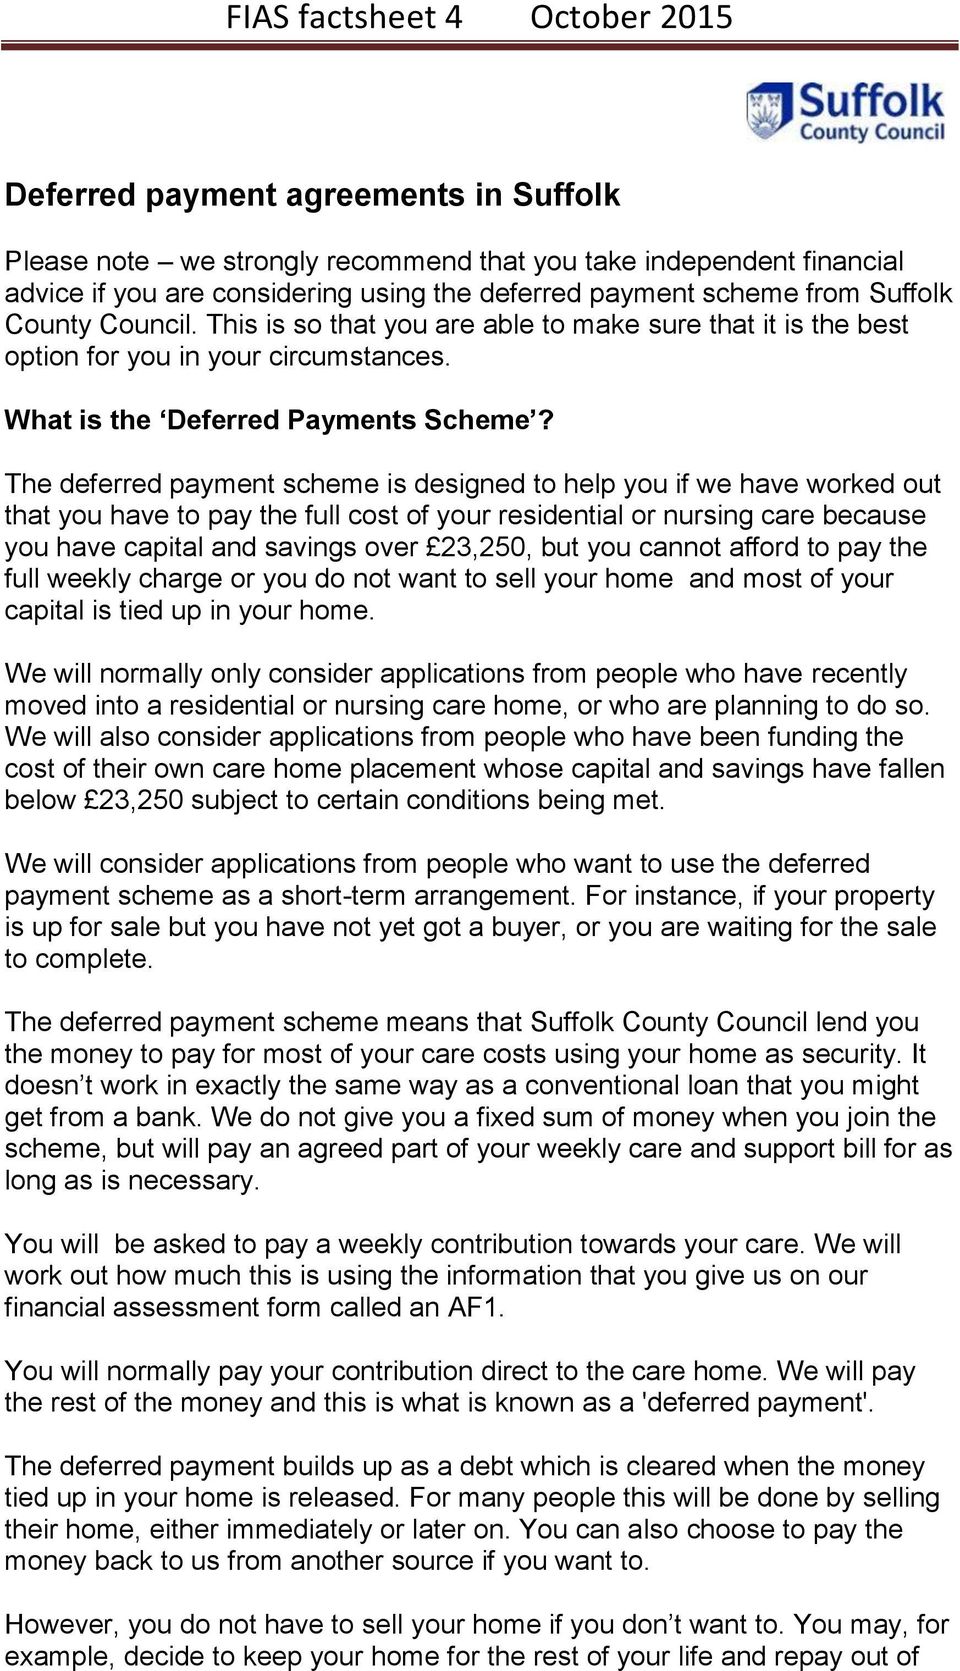 The deferred payment scheme is designed to help you if we have worked out that you have to pay the full cost of your residential or nursing care because you have capital and savings over 23,250, but